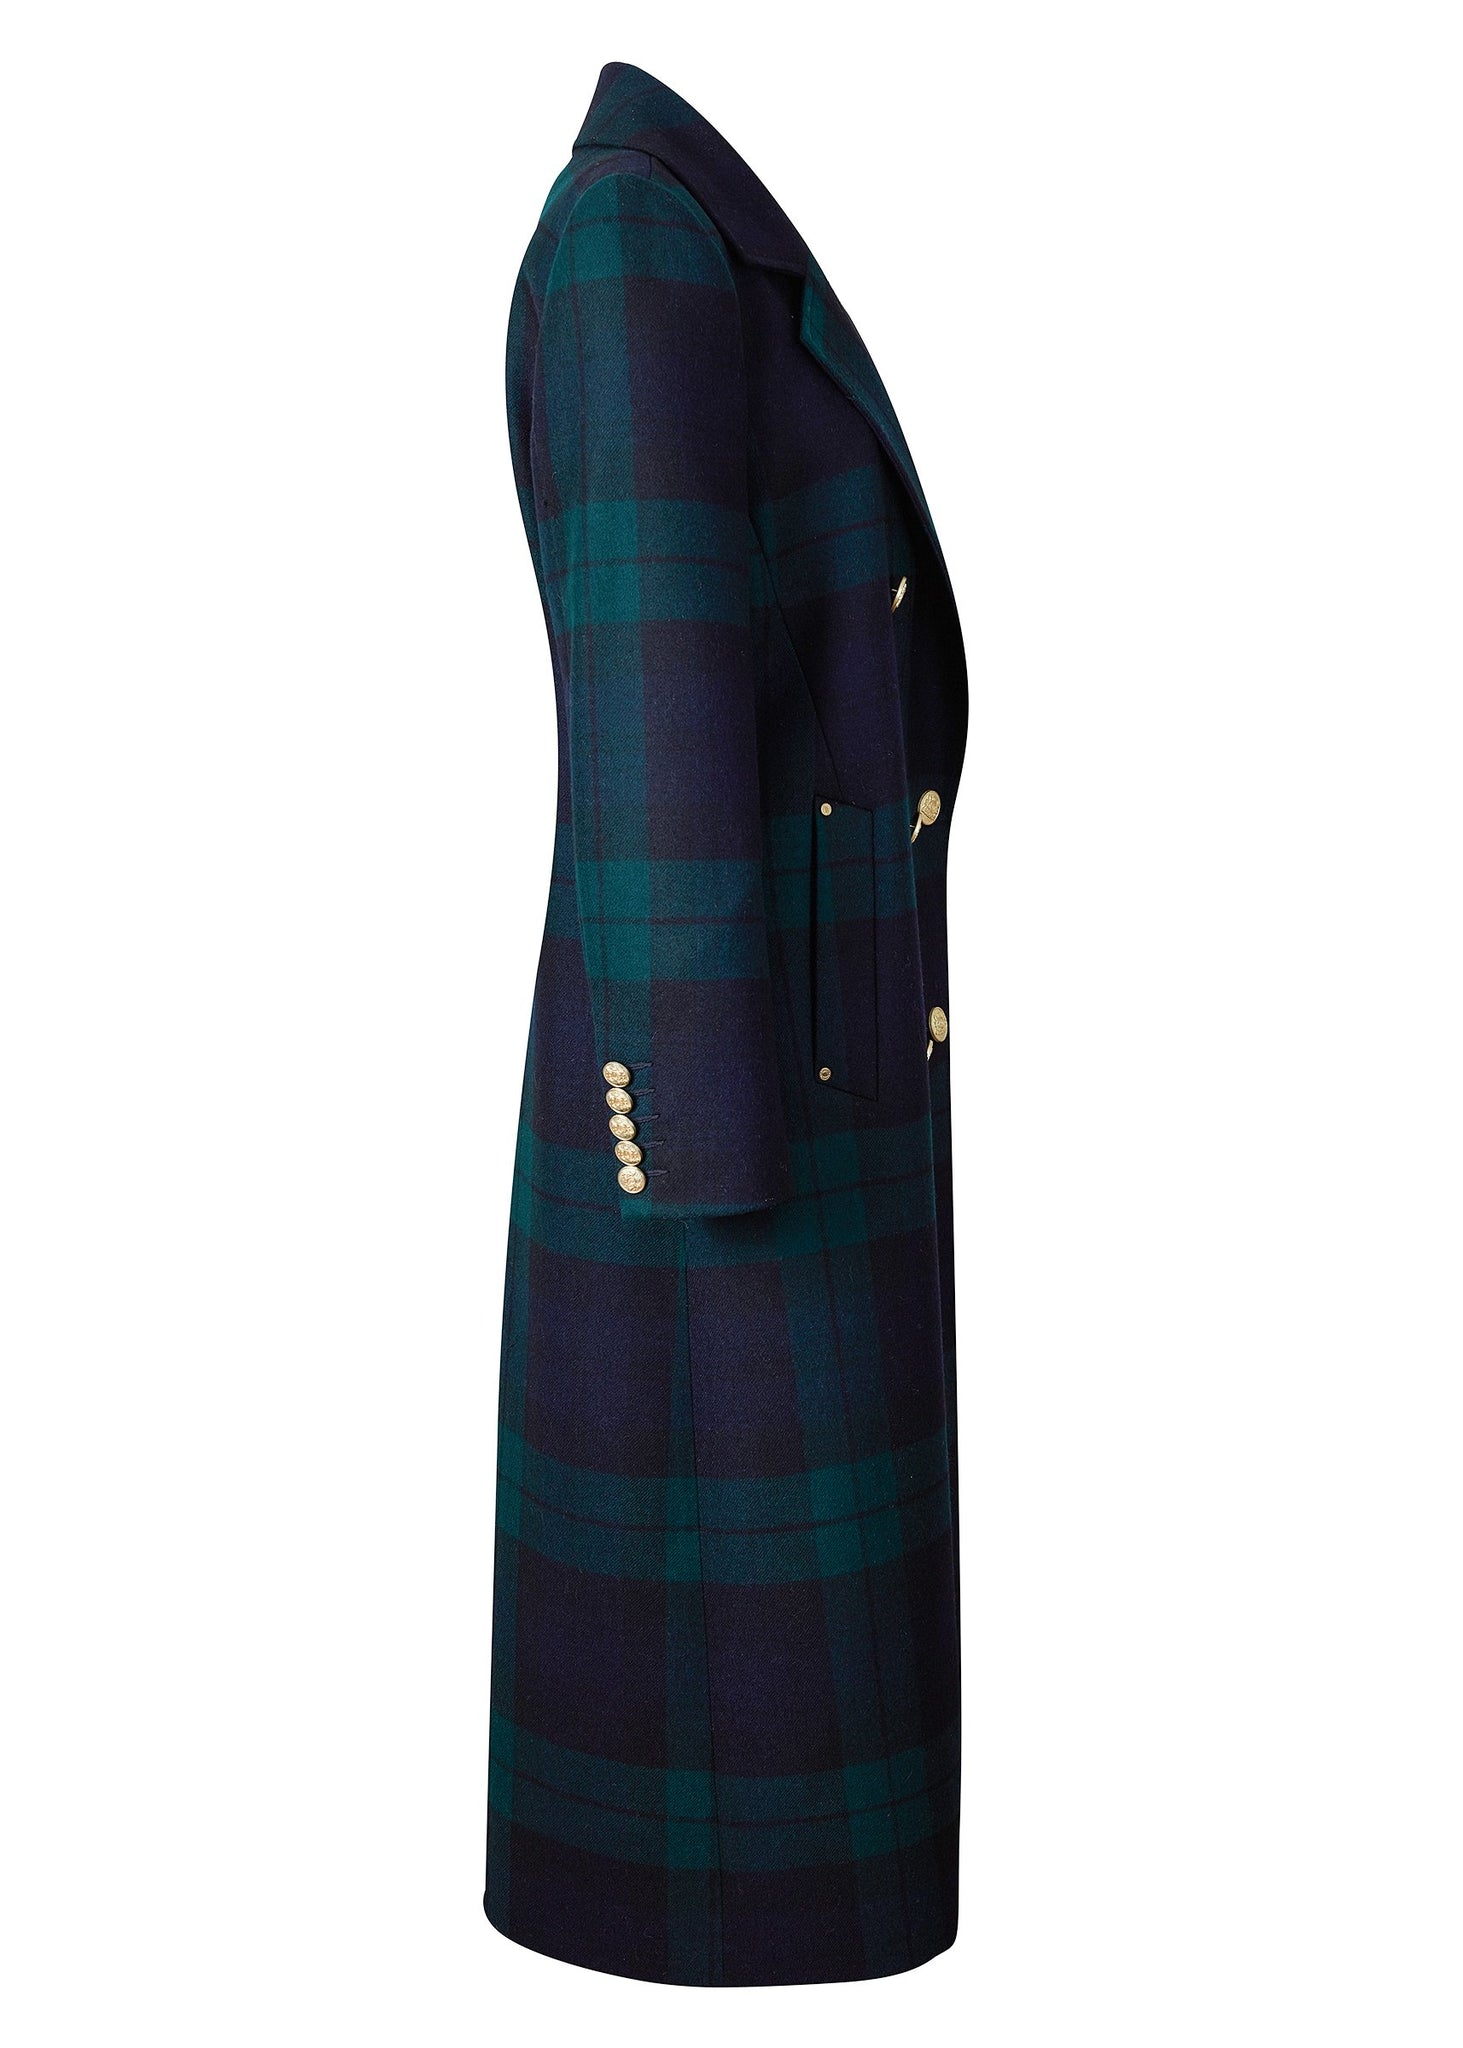 Womens blackwatch navy and green double breasted mid-length tartan tweed coat 